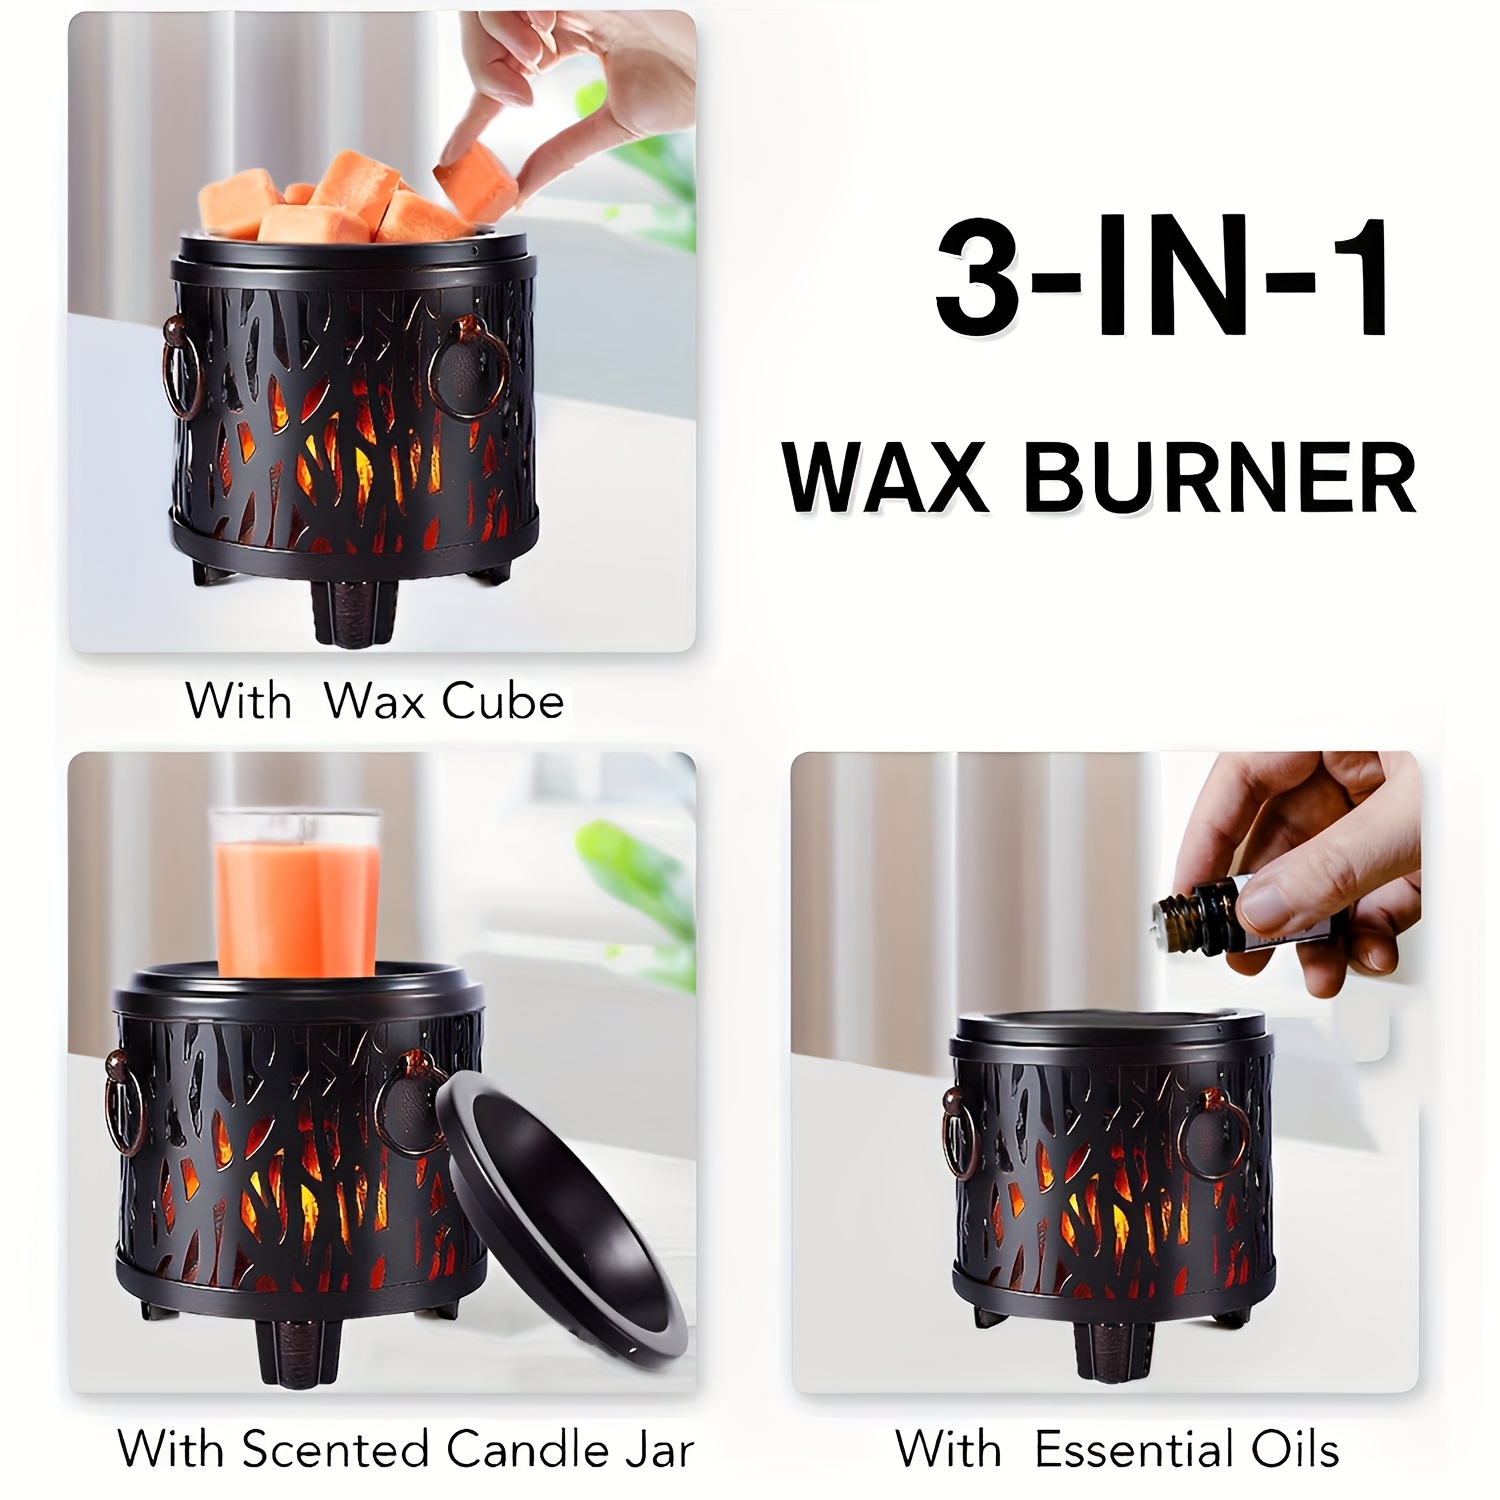  Wax Melt Warmer for Scented Wax Melts 3-in-1 Electric Ceramic  Candle Wax Warmer Burner Fragrance Wax Melter for Home Office Bedroom Gift  & Decor (Leaf) : Home & Kitchen